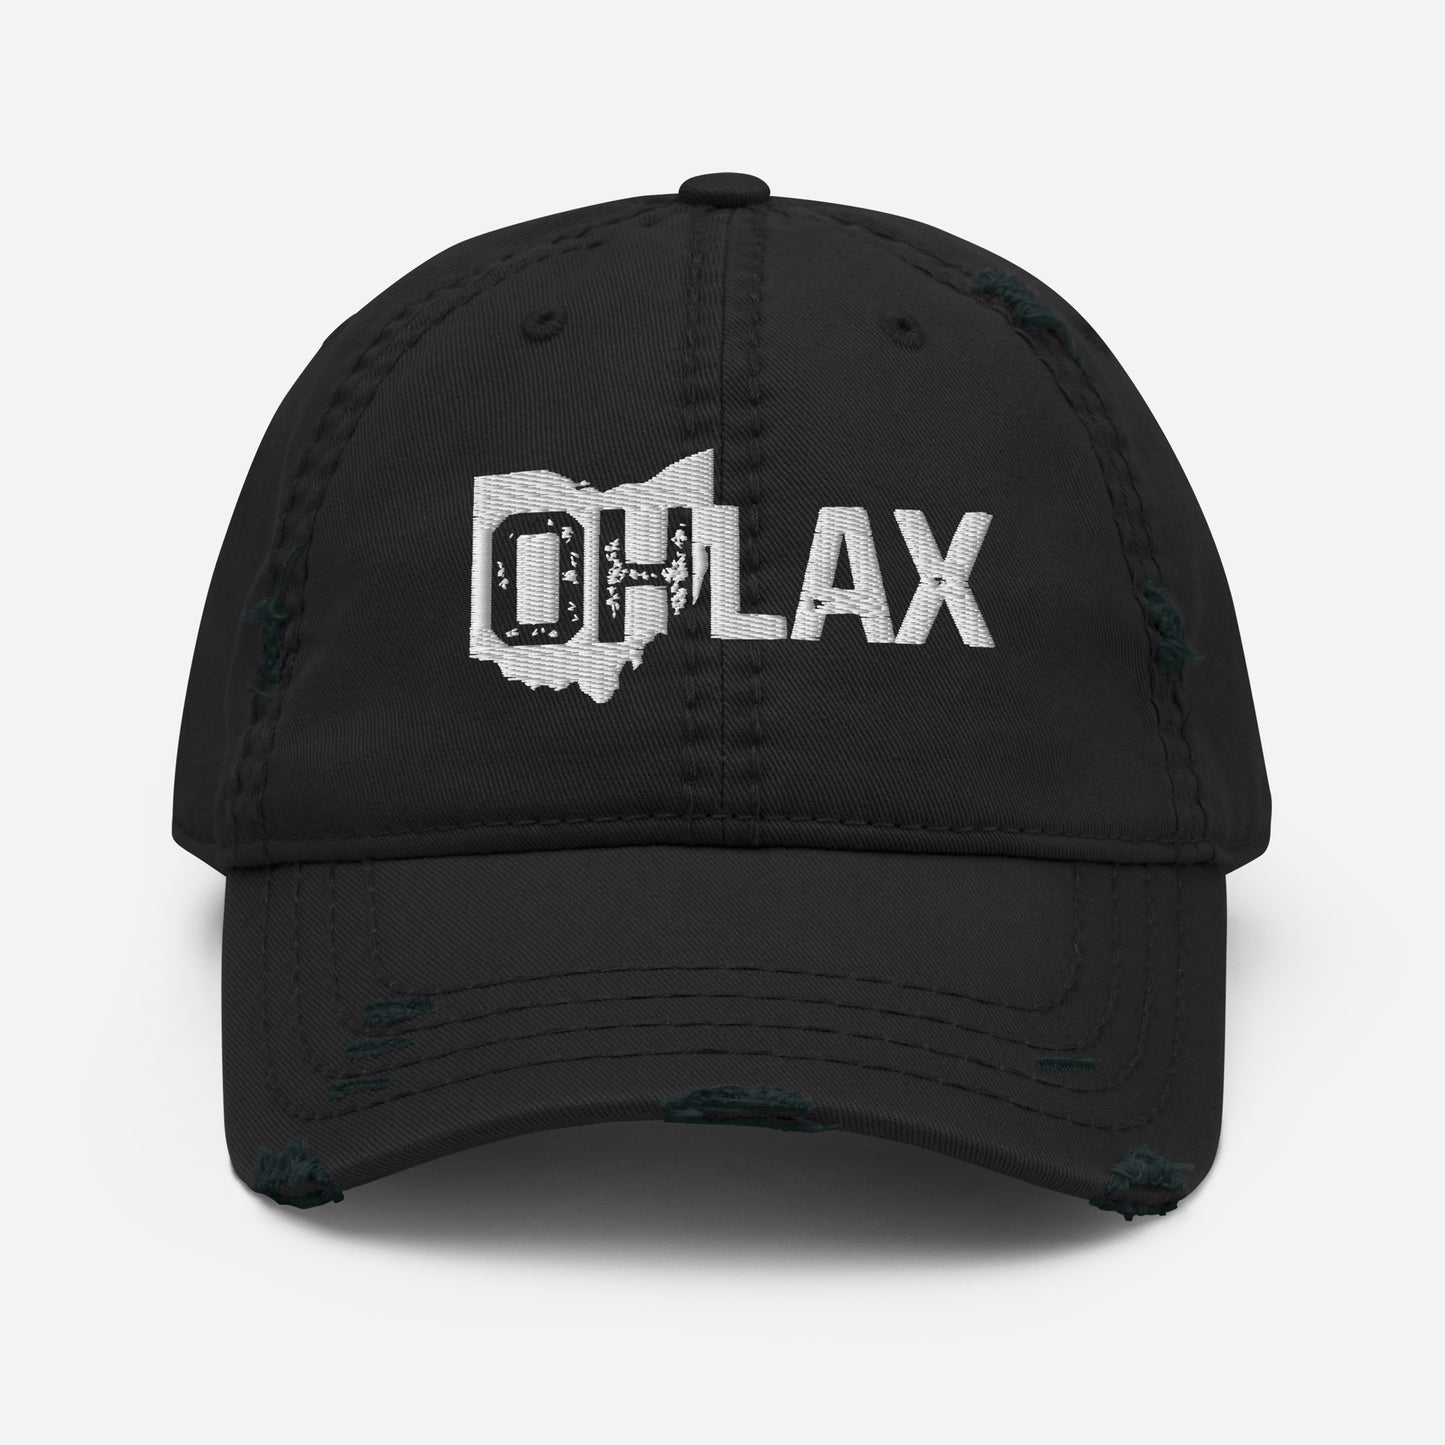 OH LAX (Player substitution)-Distressed Dad Hat